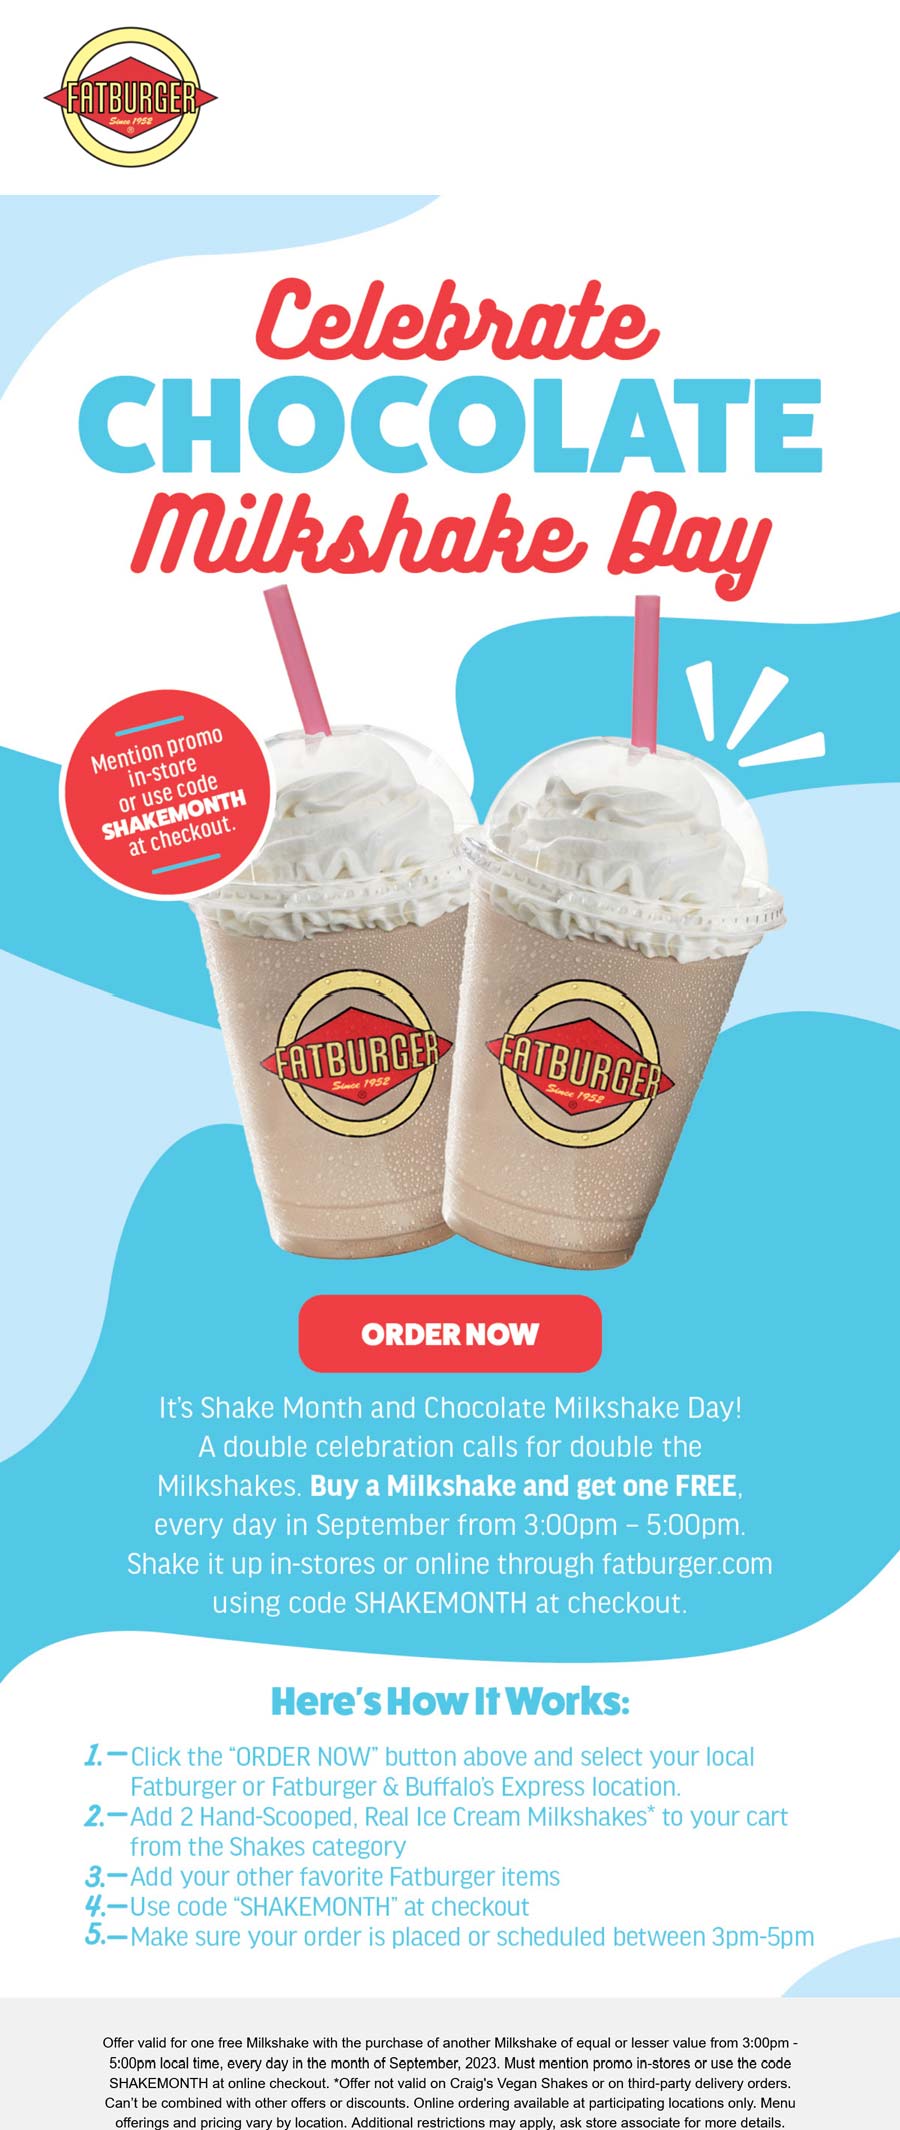 Fatburger stores Coupon  Second milkshake free 3-5p all month at Fatburger, or online via promo code SHAKEMONTH #fatburger 